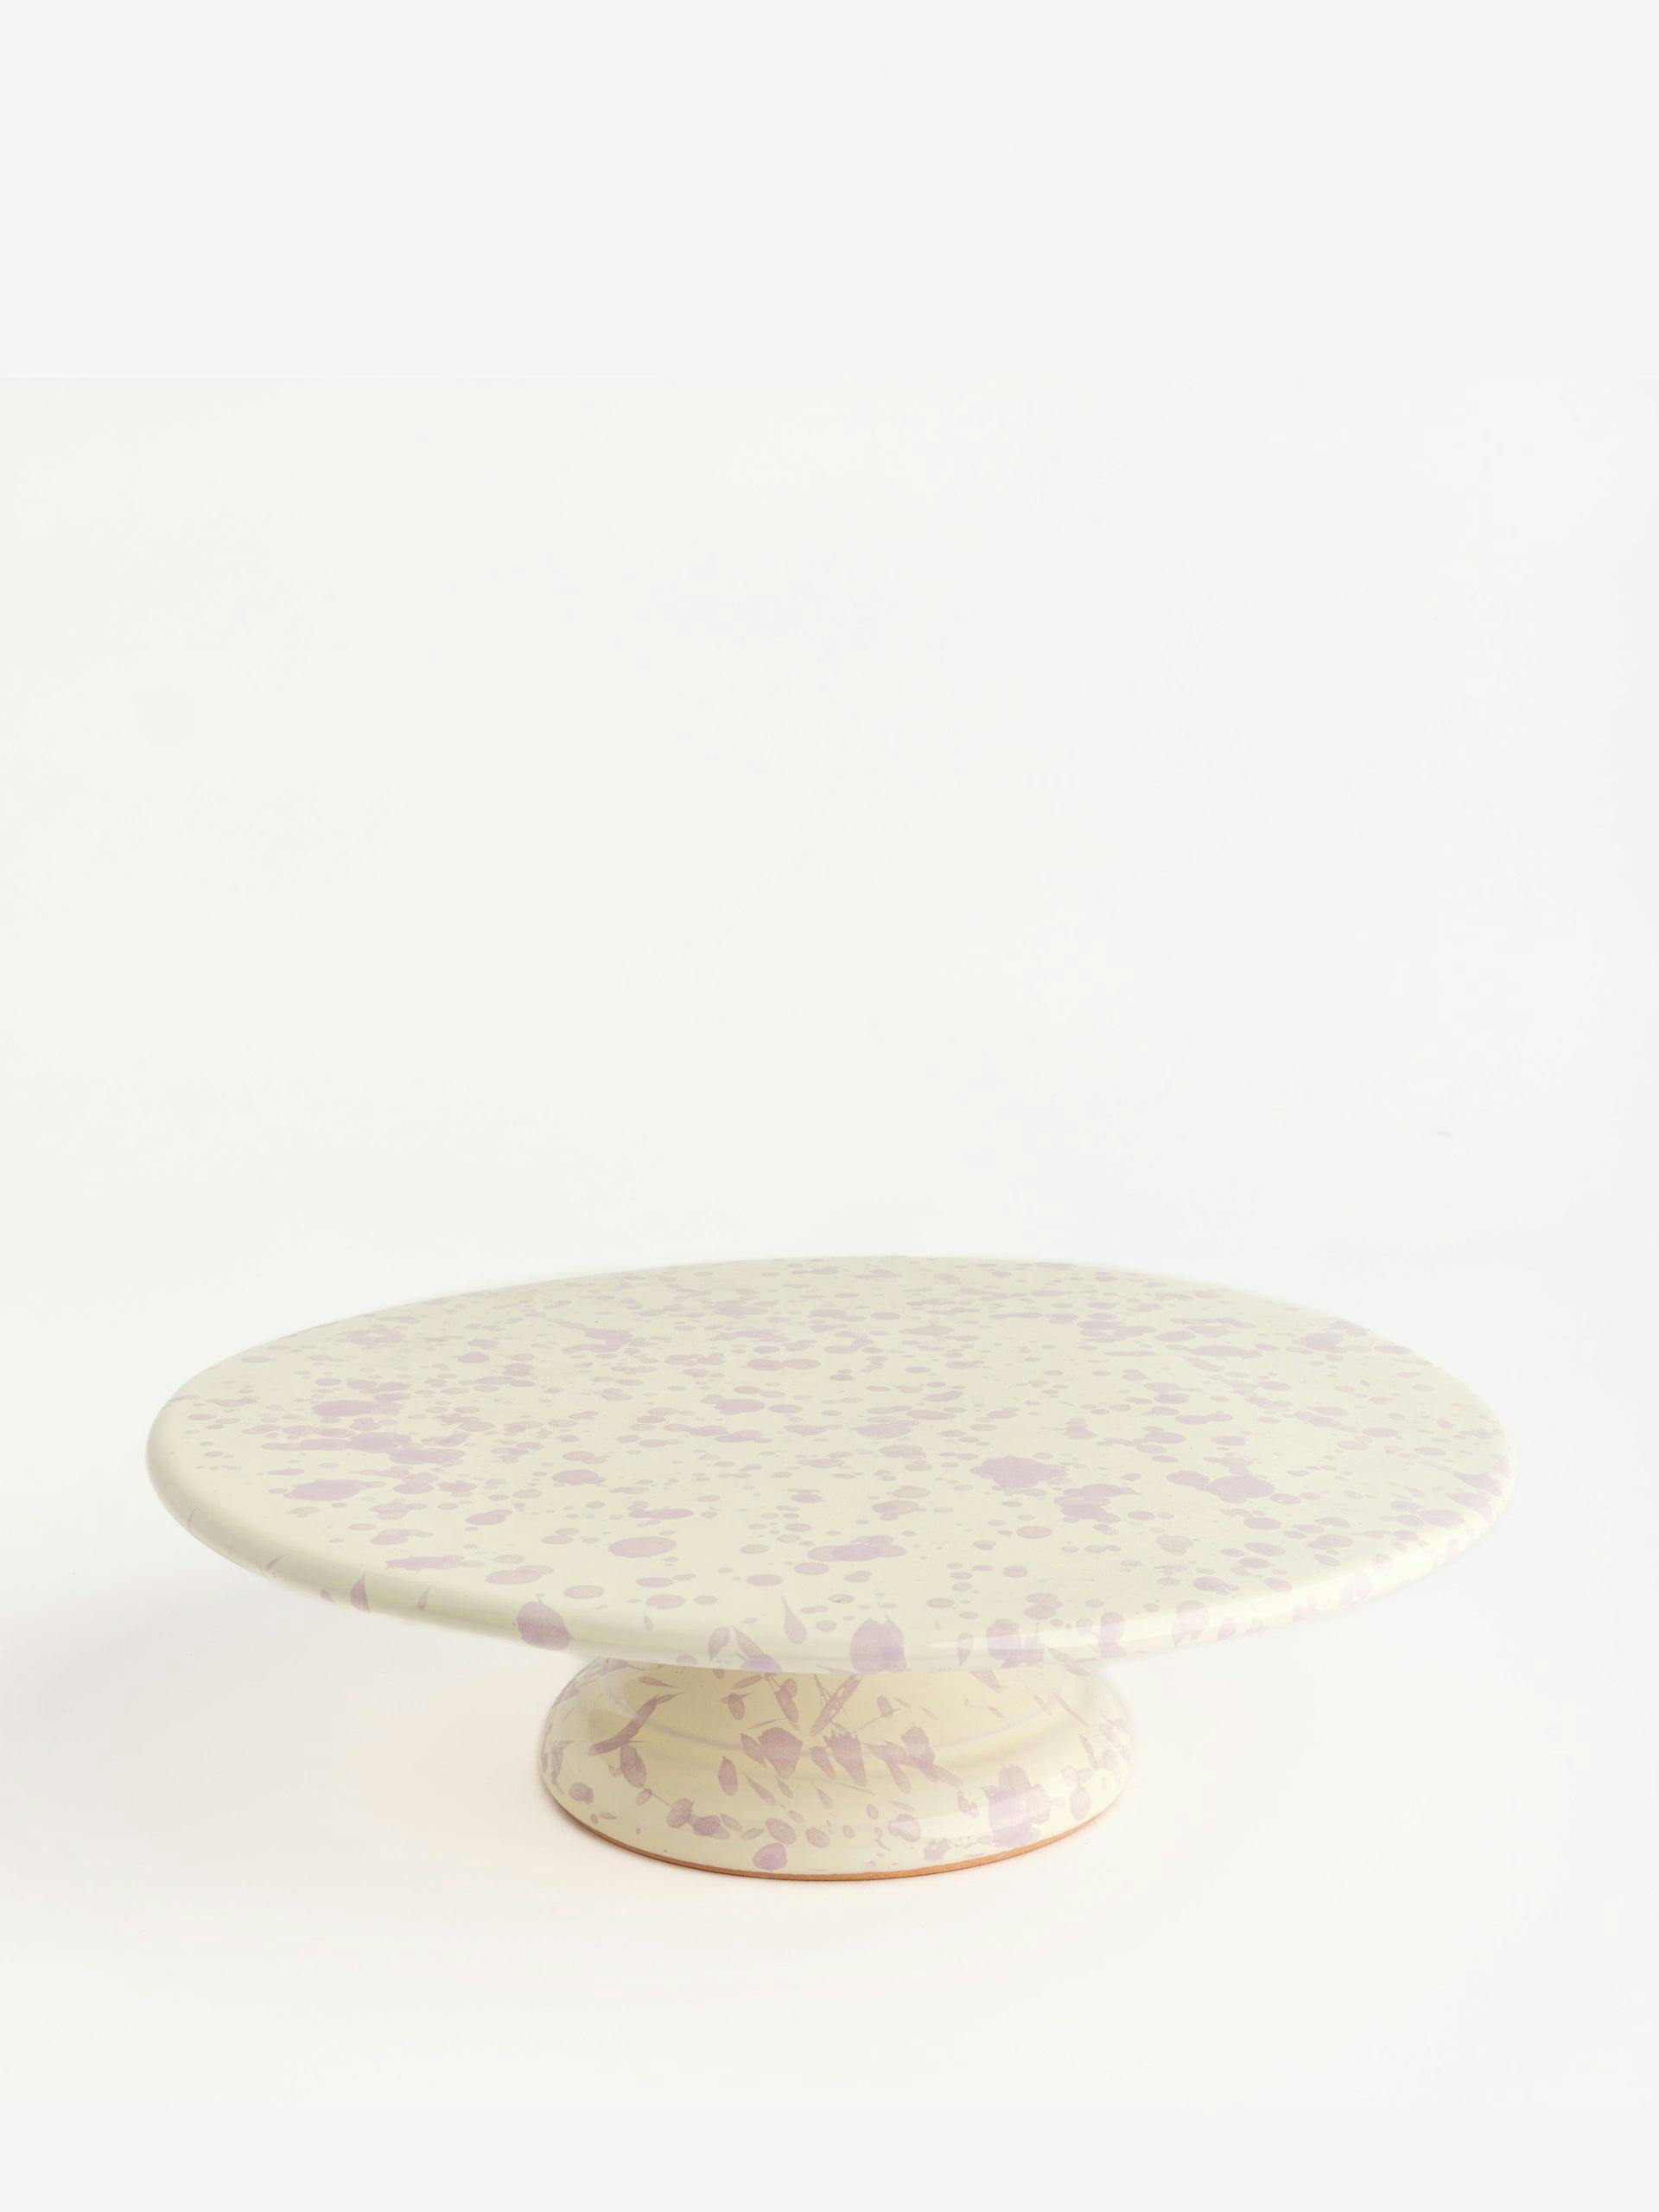 Cake stand in lilac